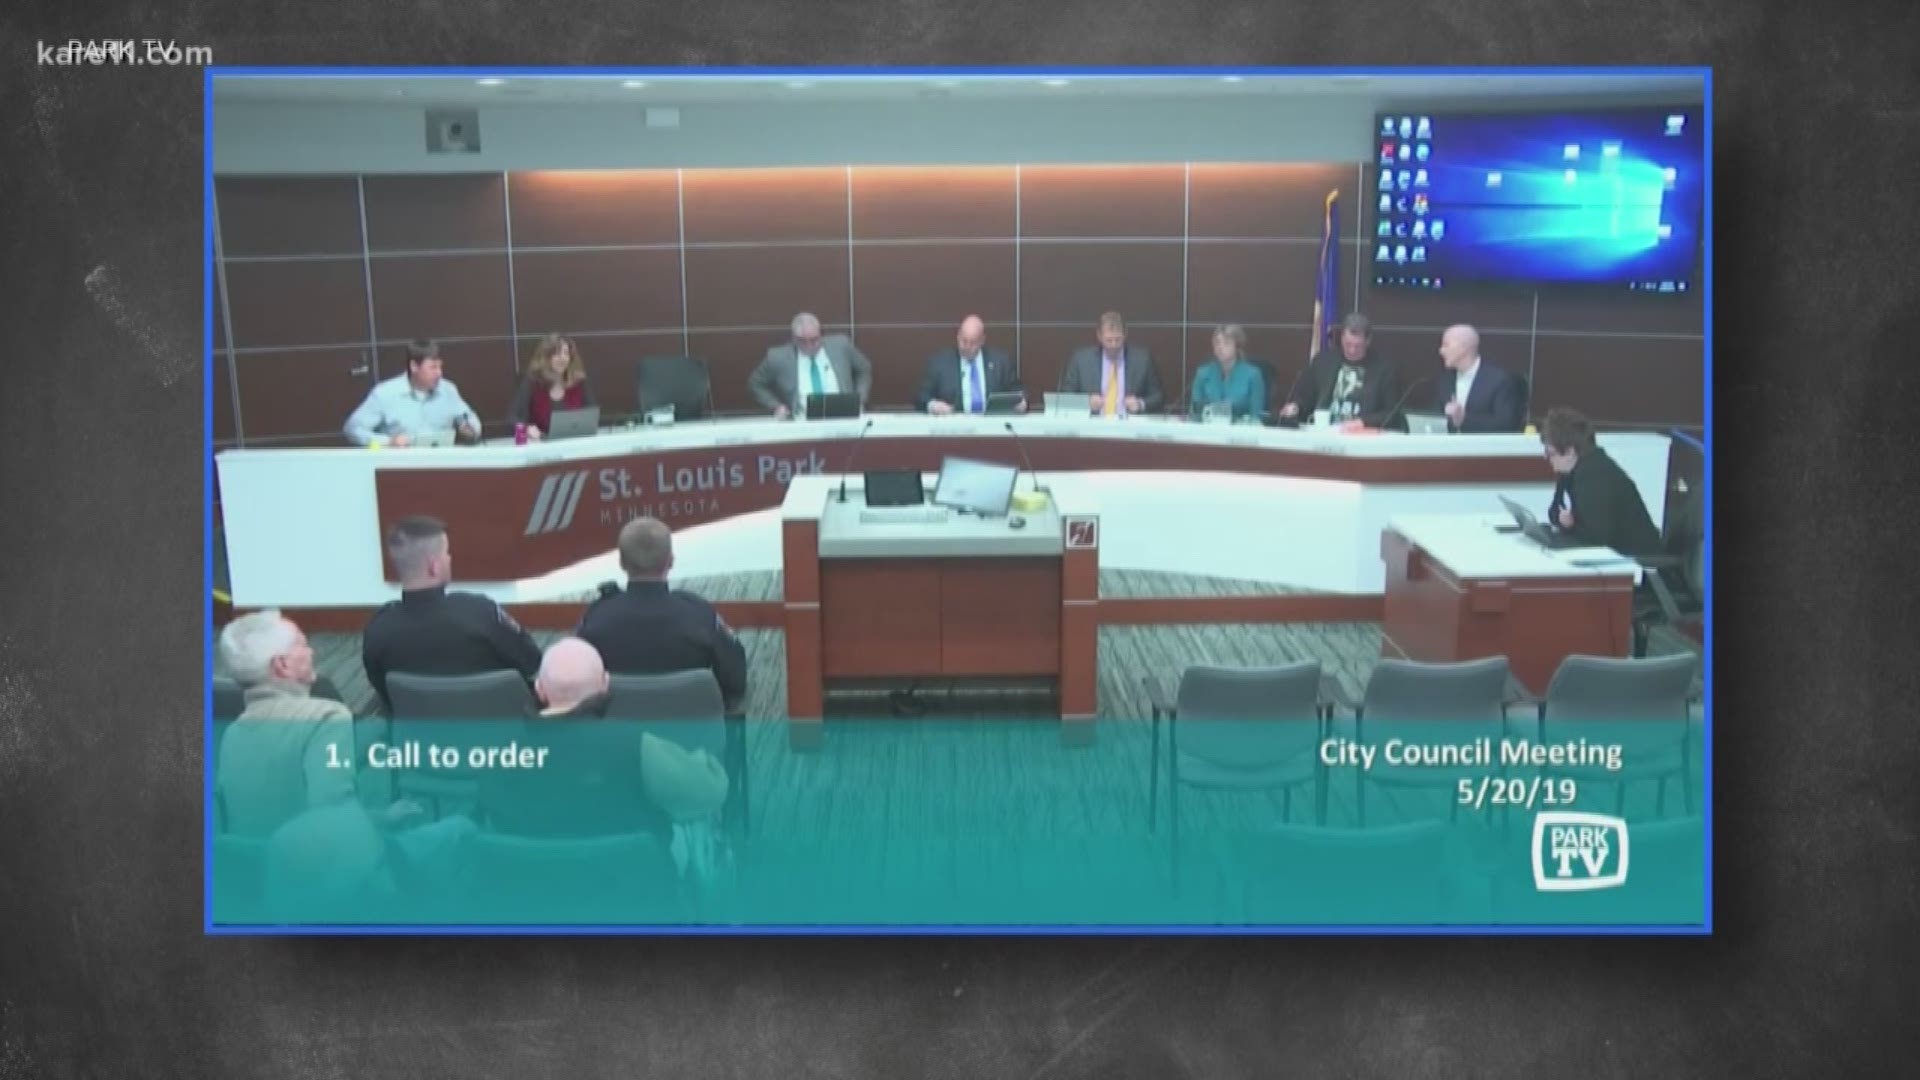 After announcing they would no longer say the Pledge of Allegiance before public meetings, the St. Louis Park City Council is meeting to revisit the issue. https://kare11.tv/2FXtZV6